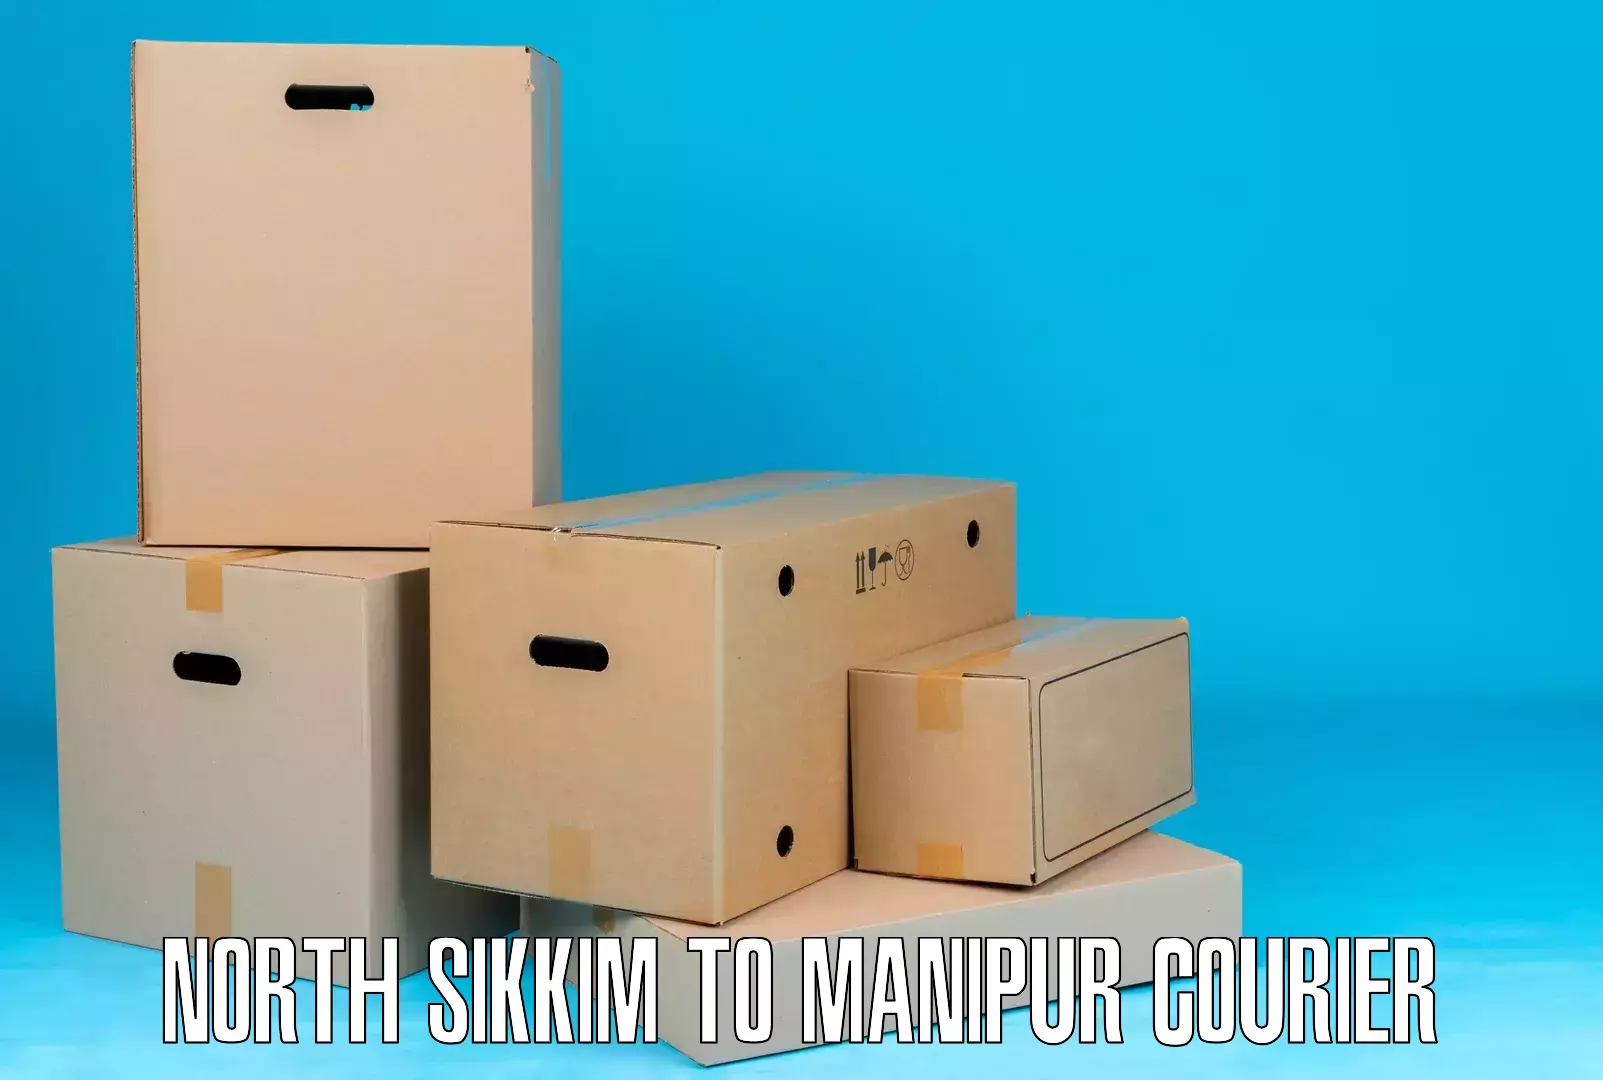 Courier tracking online North Sikkim to Manipur